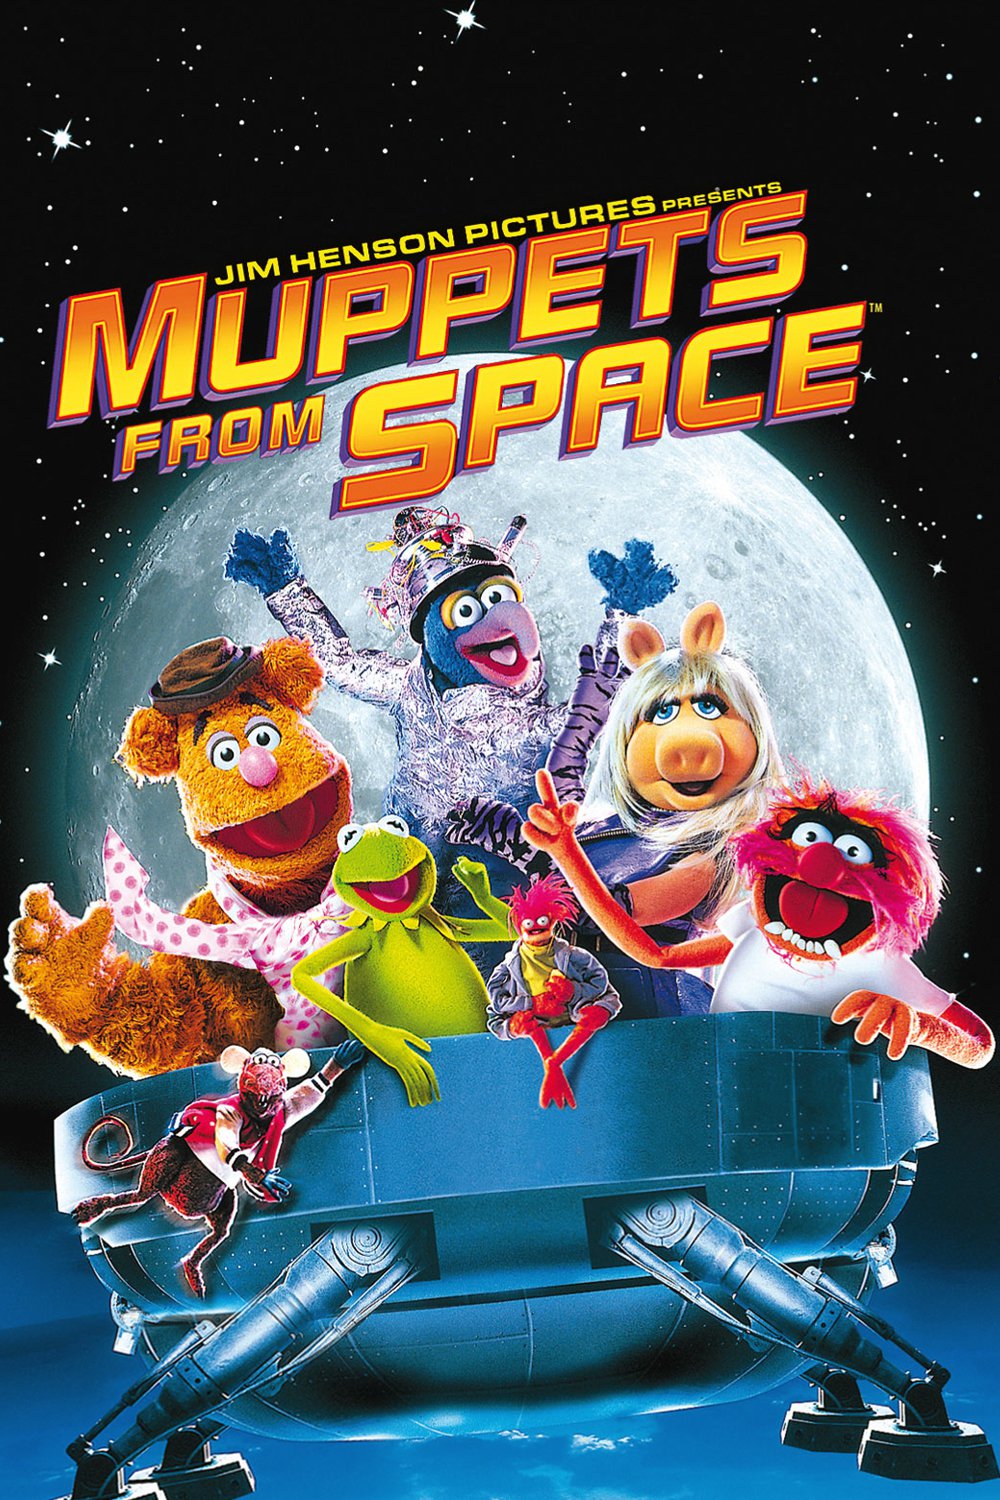 Poster for the movie "Muppets from Space"